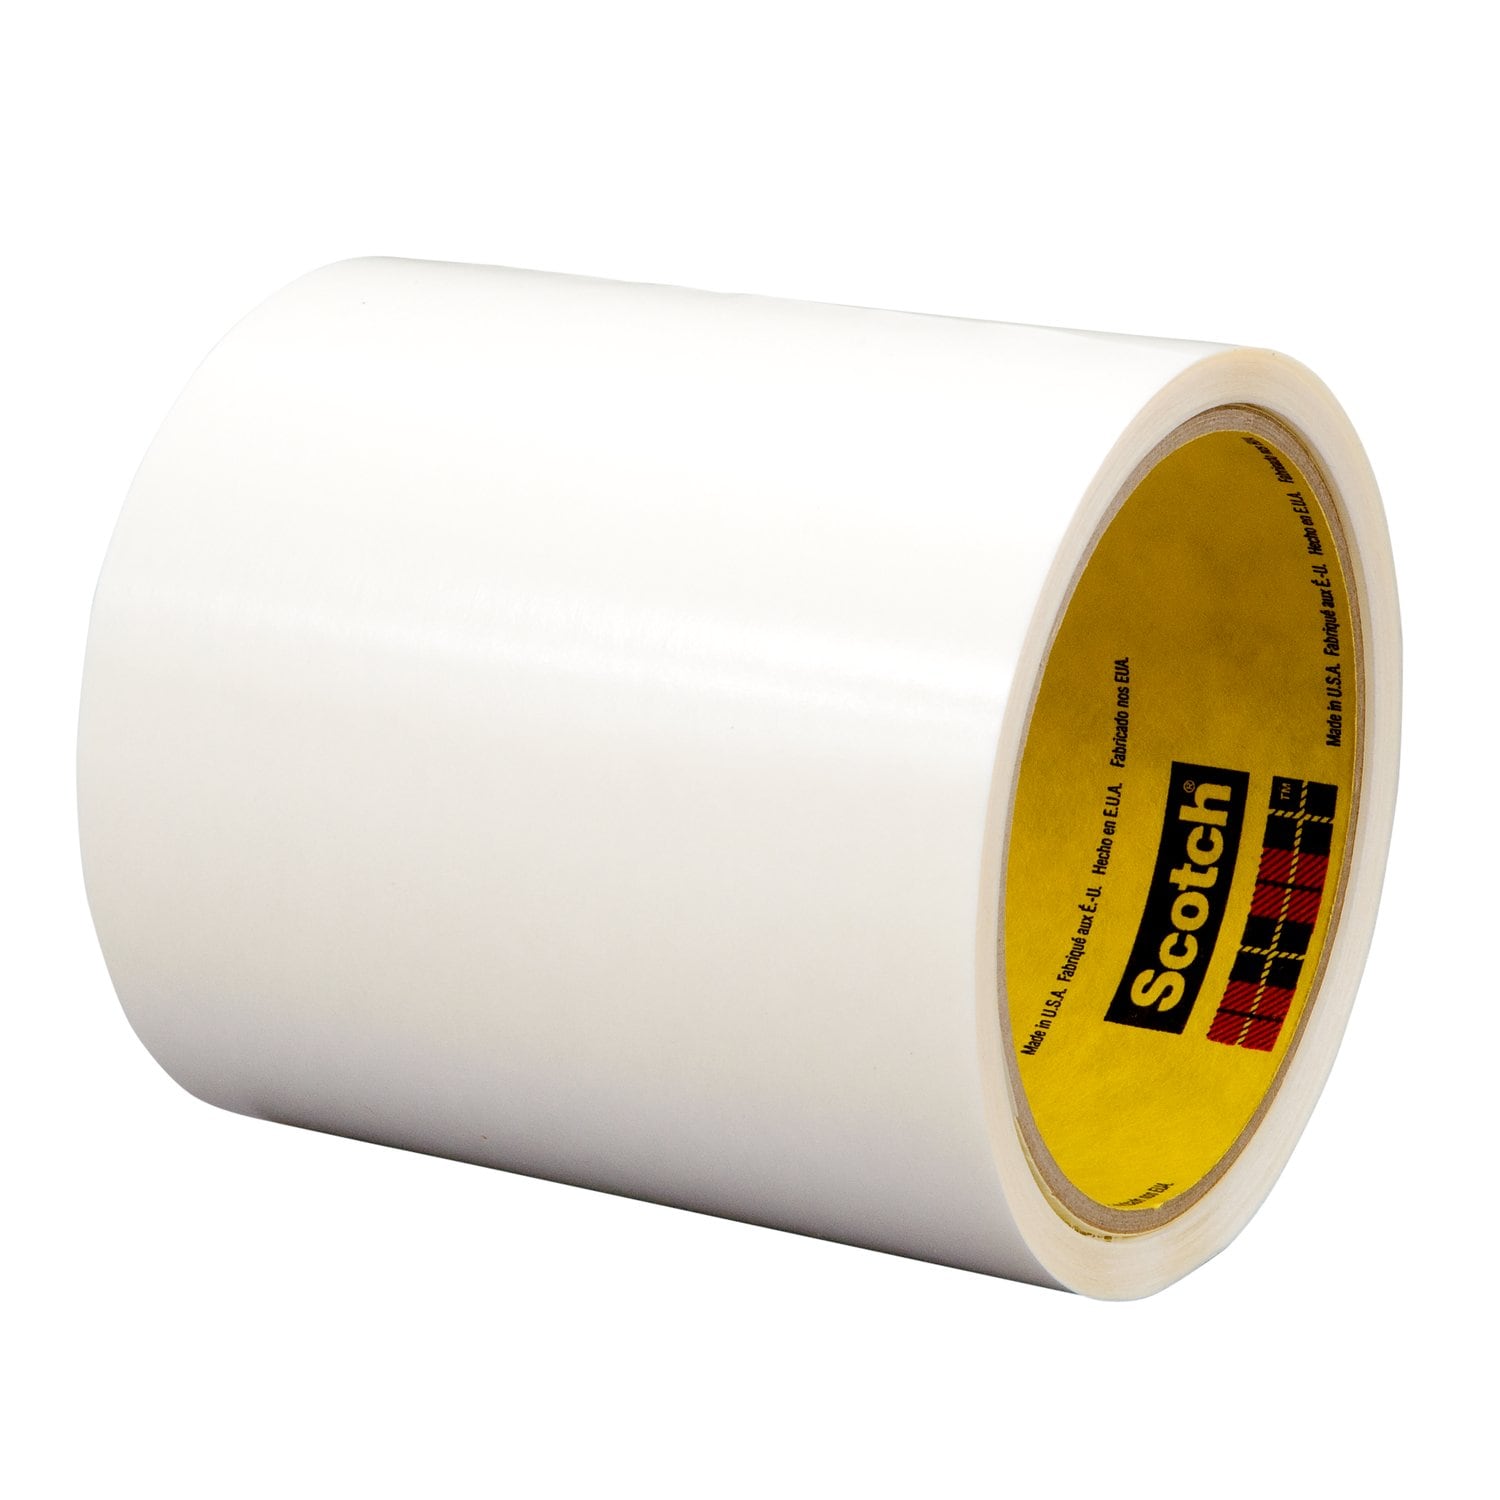 7010334478 - 3M Double Coated Tape 9828, Clear, 2 in x 60 yd, 4 mil, 24 rolls per
case